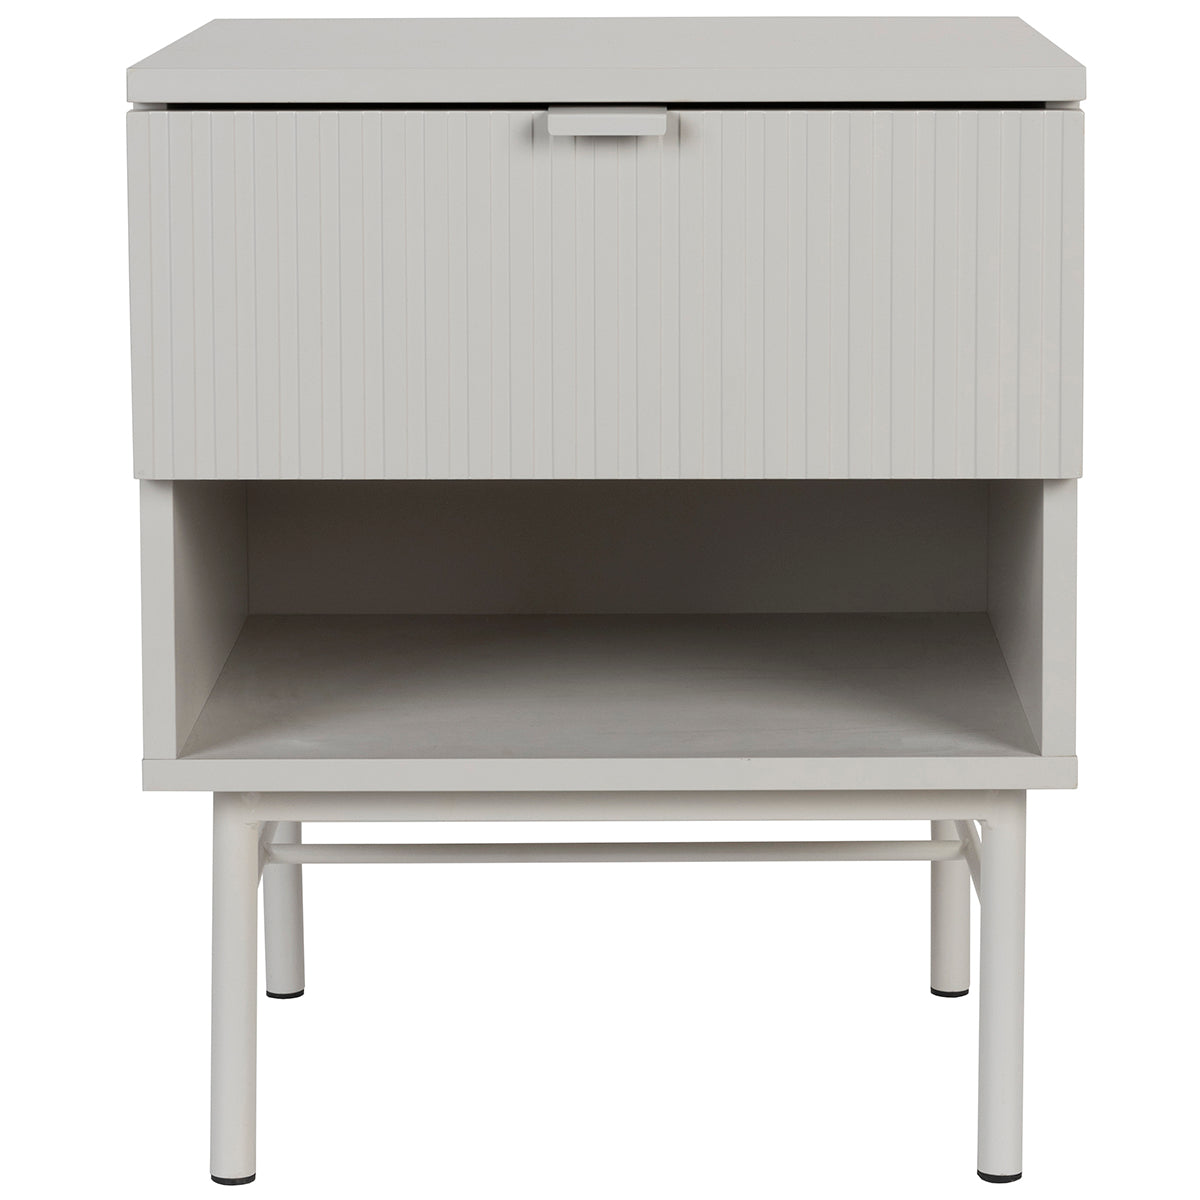 Cayo White Bedside Table